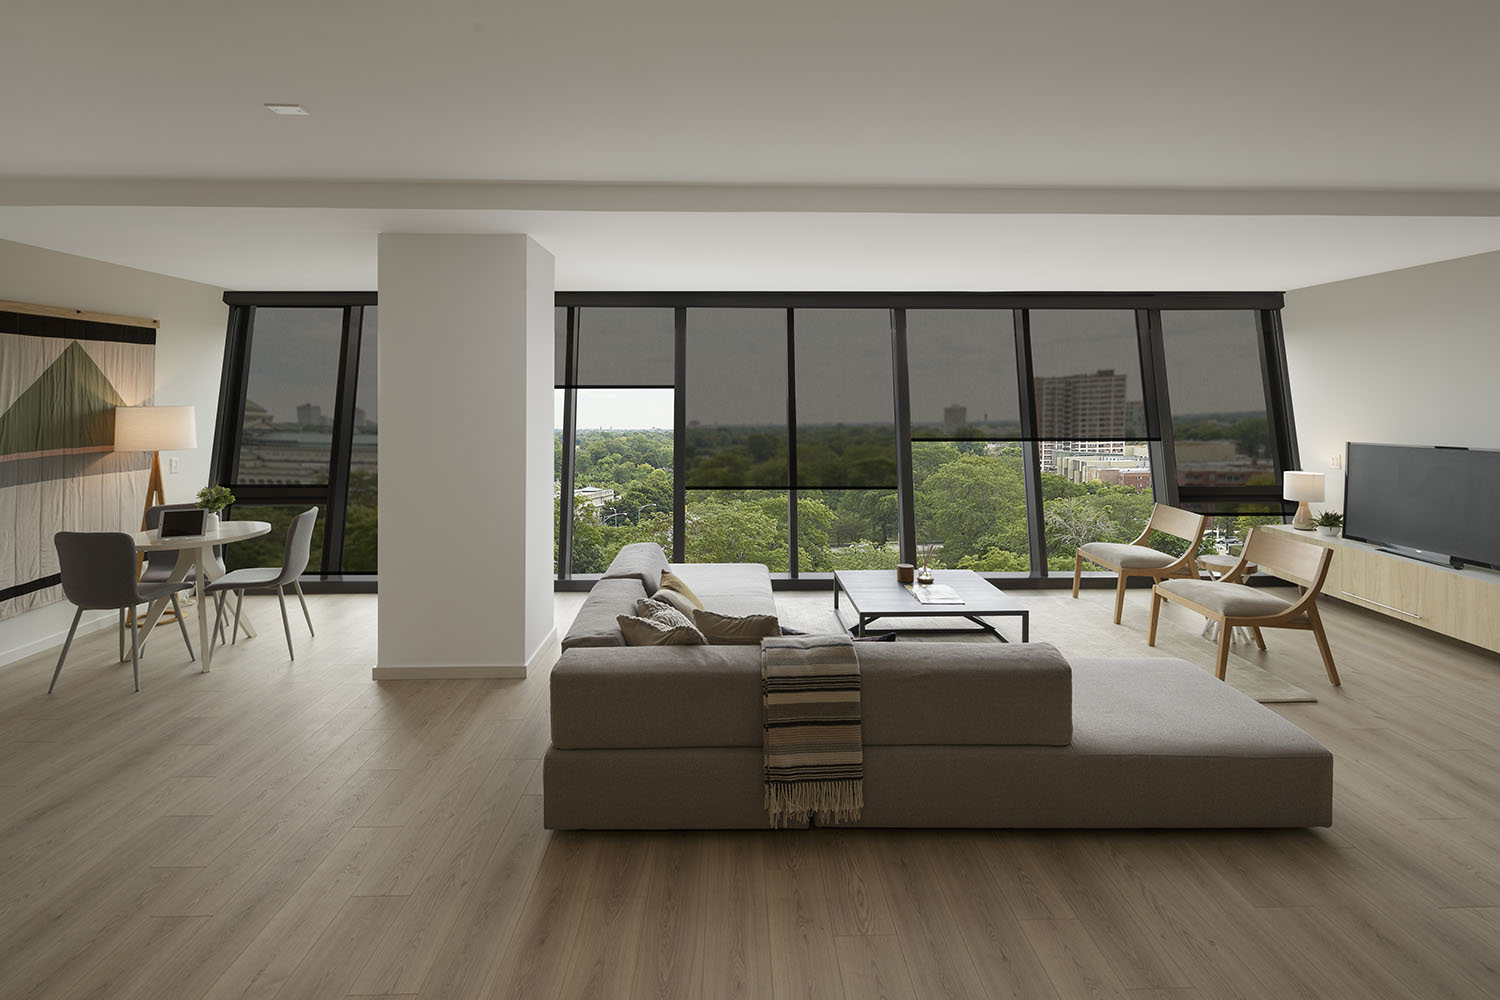 large open-plan living room with wood floors and angled glass windows in backhground